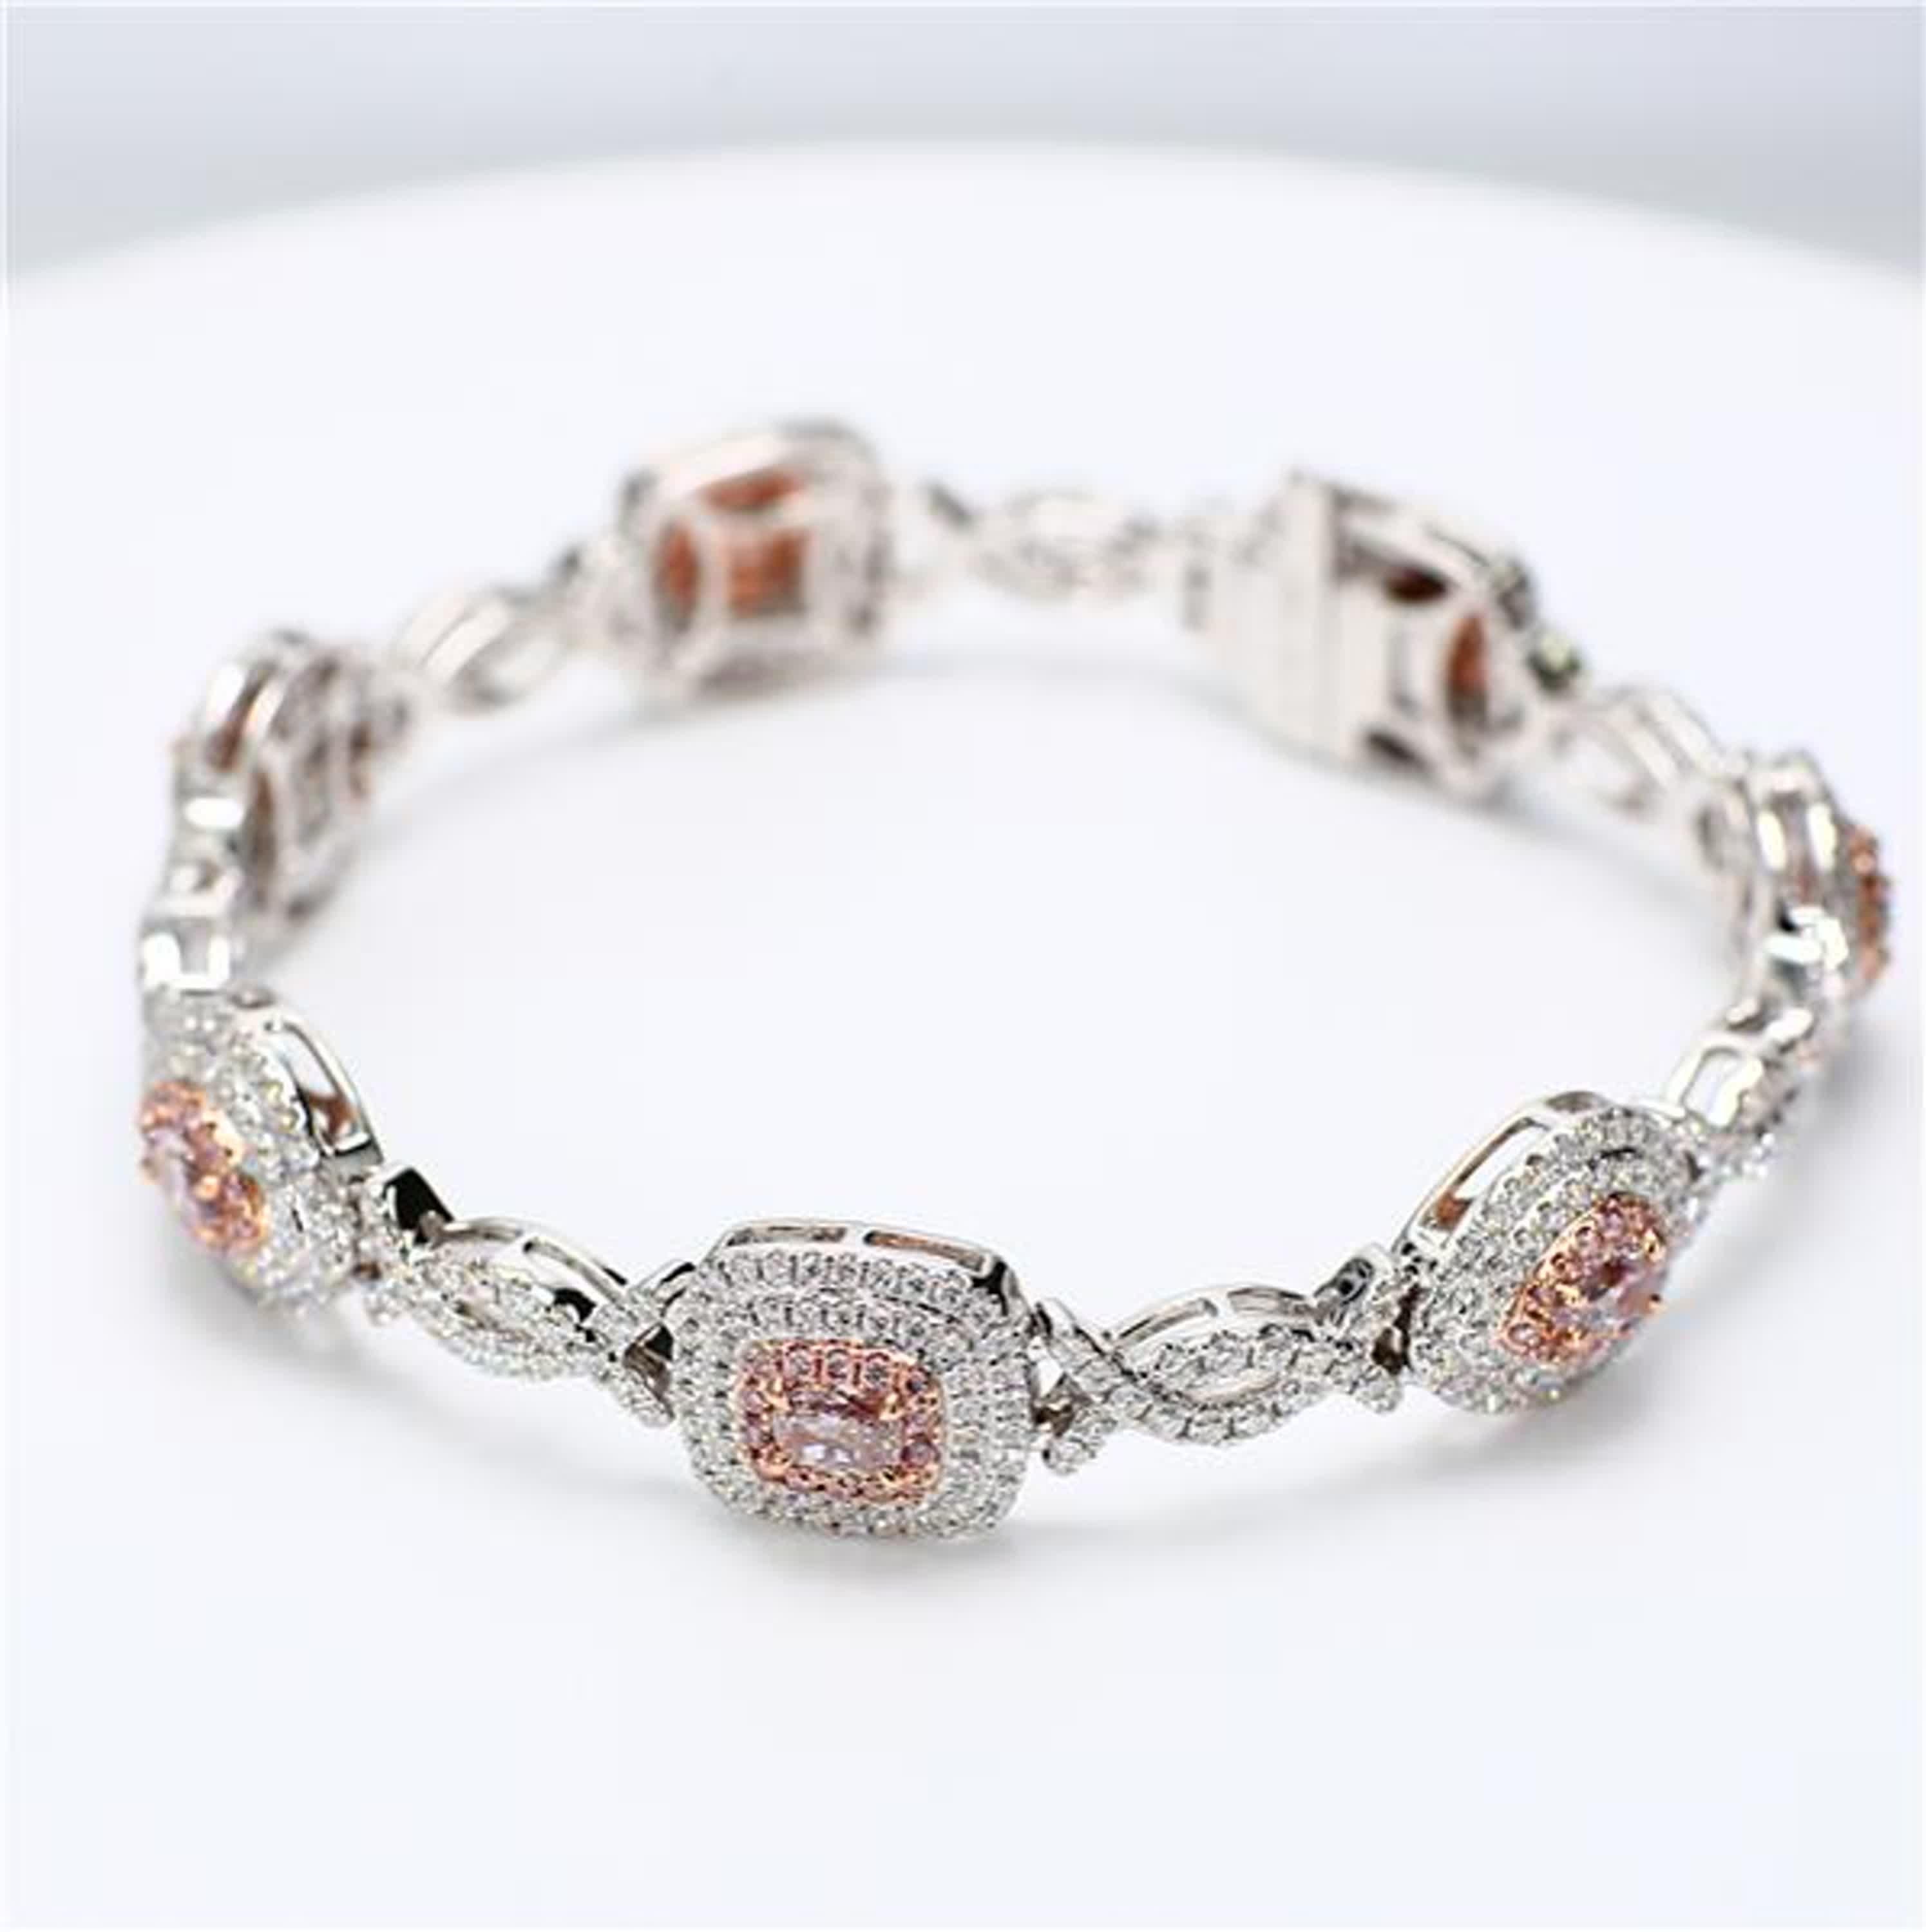 RareGemWorld's intriguing diamond bracelet. Mounted in a beautiful 18K Rose and White Gold setting with 2 natural oval cut pink diamonds, 2 natural cushion cut pink diamonds, 1 natural radiant cut pink diamond, 1 natural marquise cut pink diamond,